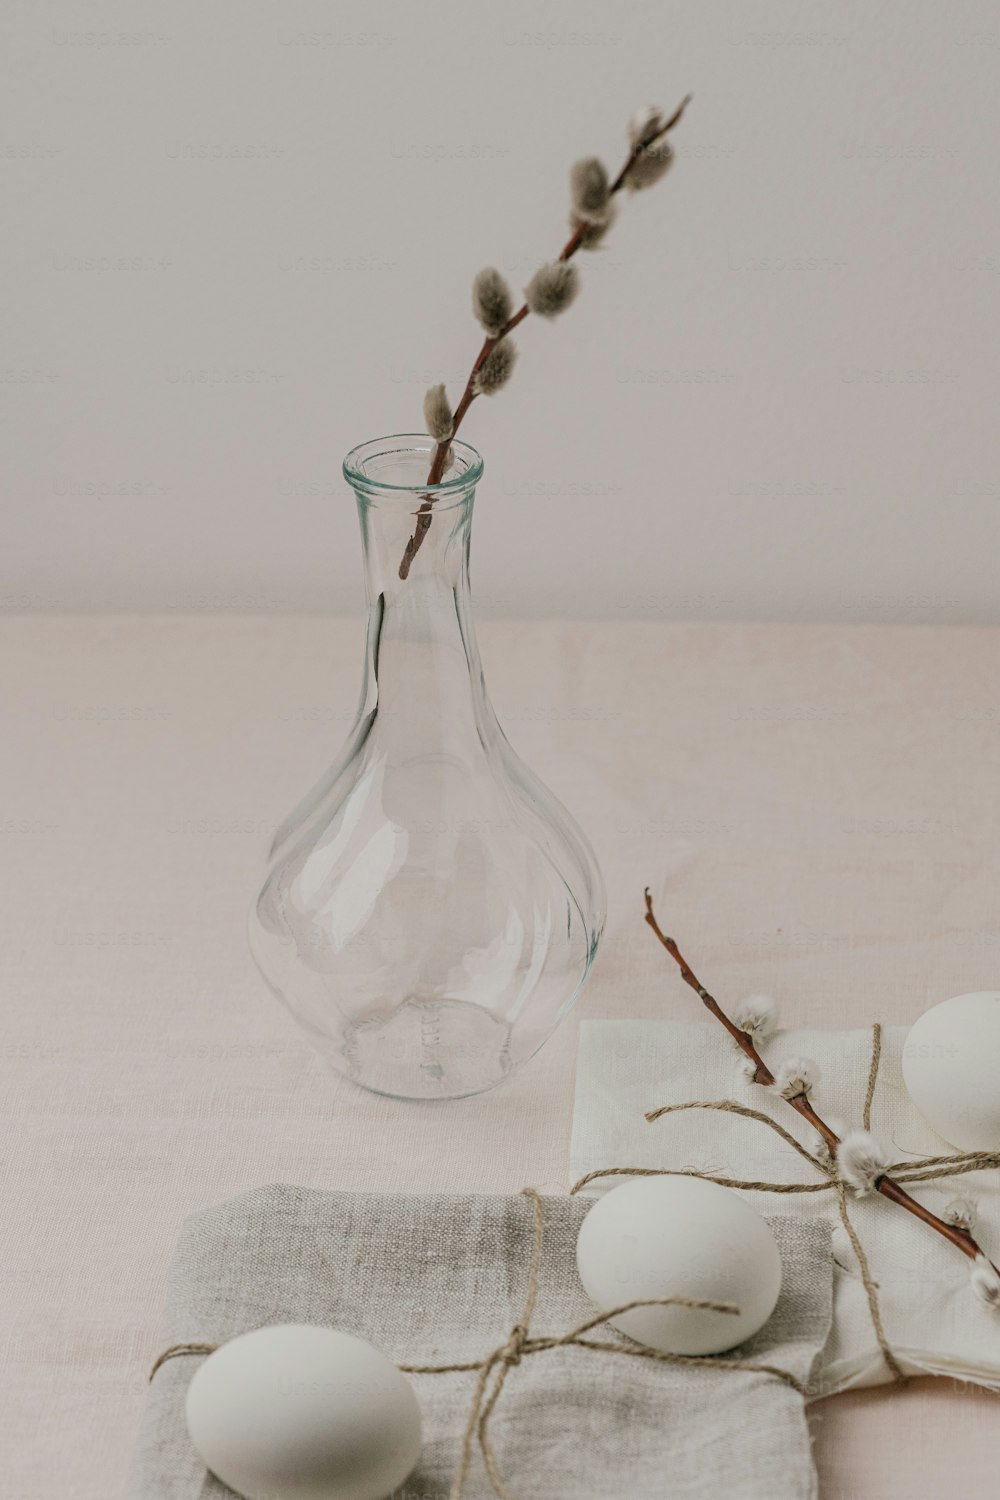 a glass vase with a twig sticking out of it